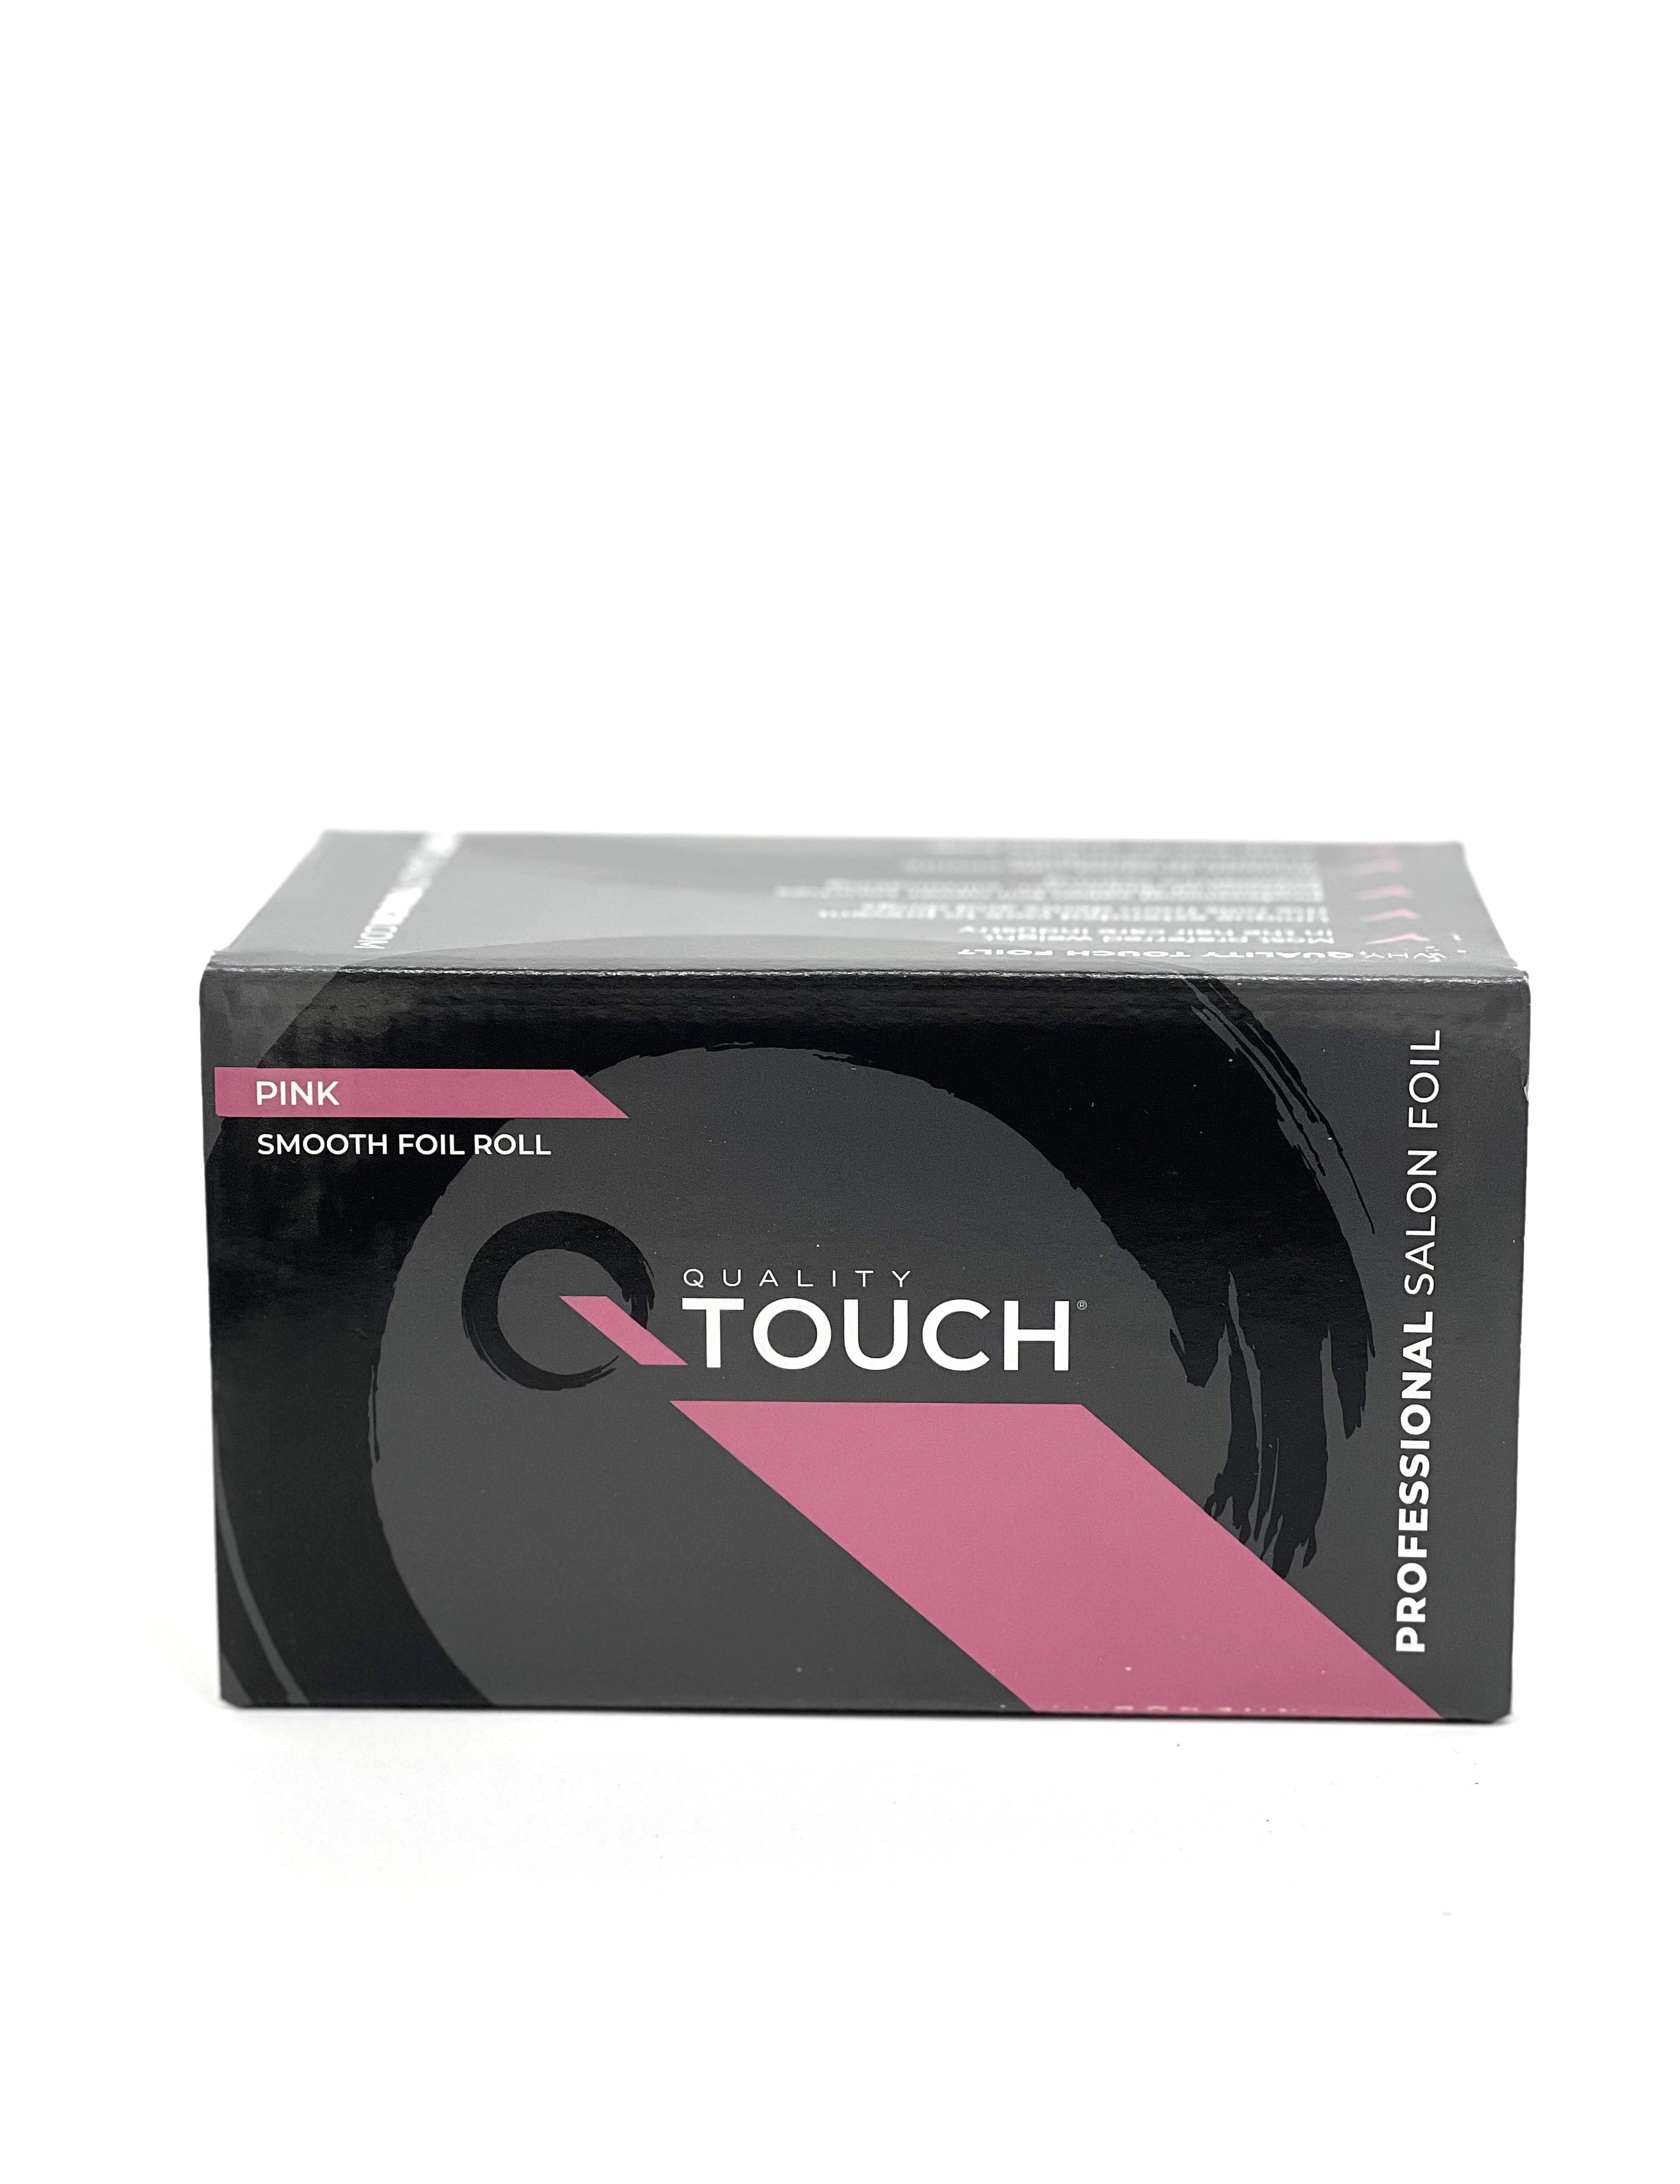 Professional Highlighting Foil for Hairstylists - Pink | #1 Rolled Foil from Quality Touch